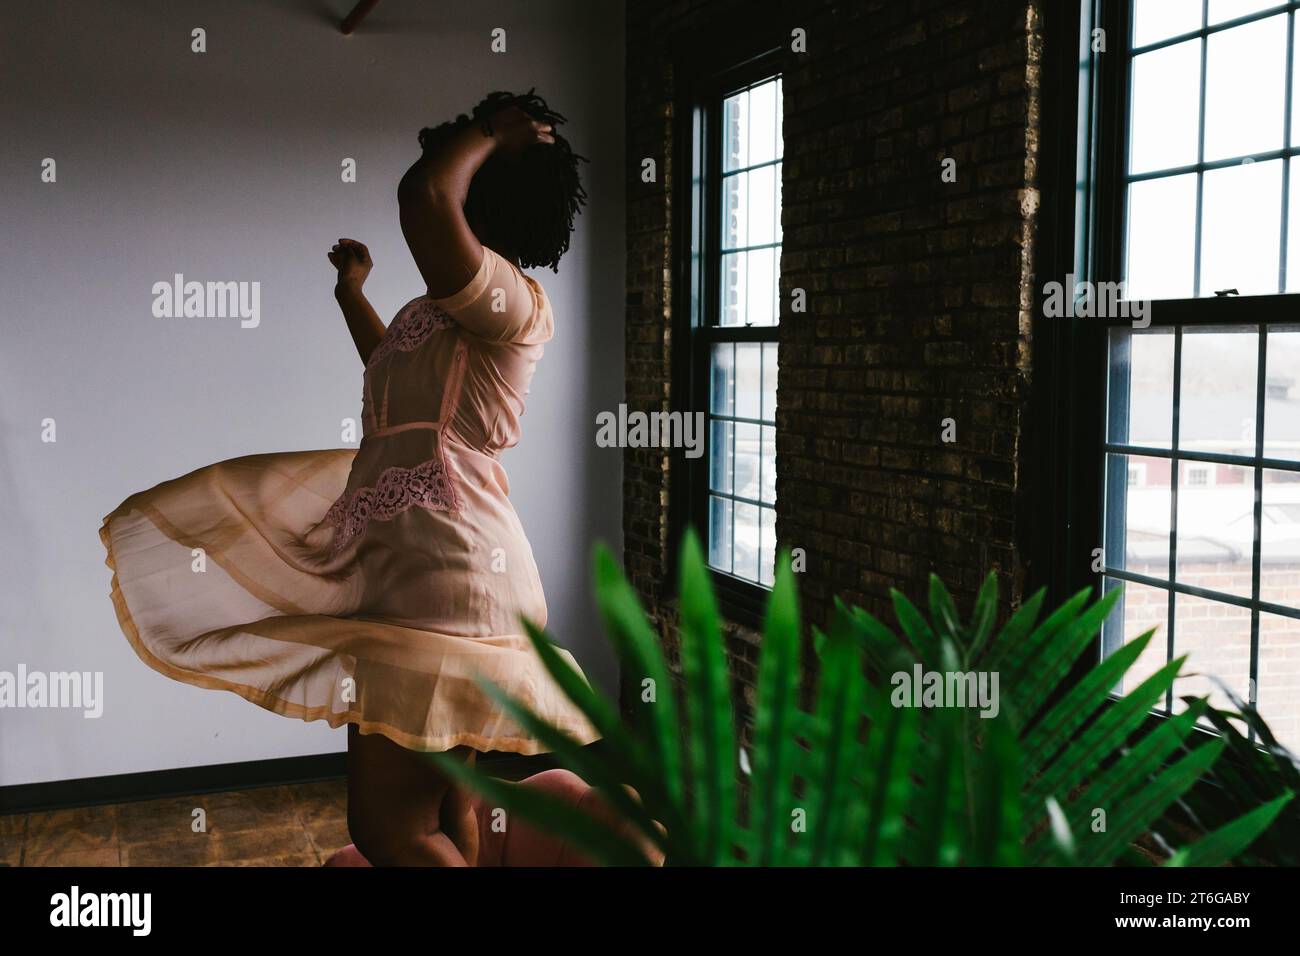 Female dancer twirls in dress in building with brick and windows Stock Photo